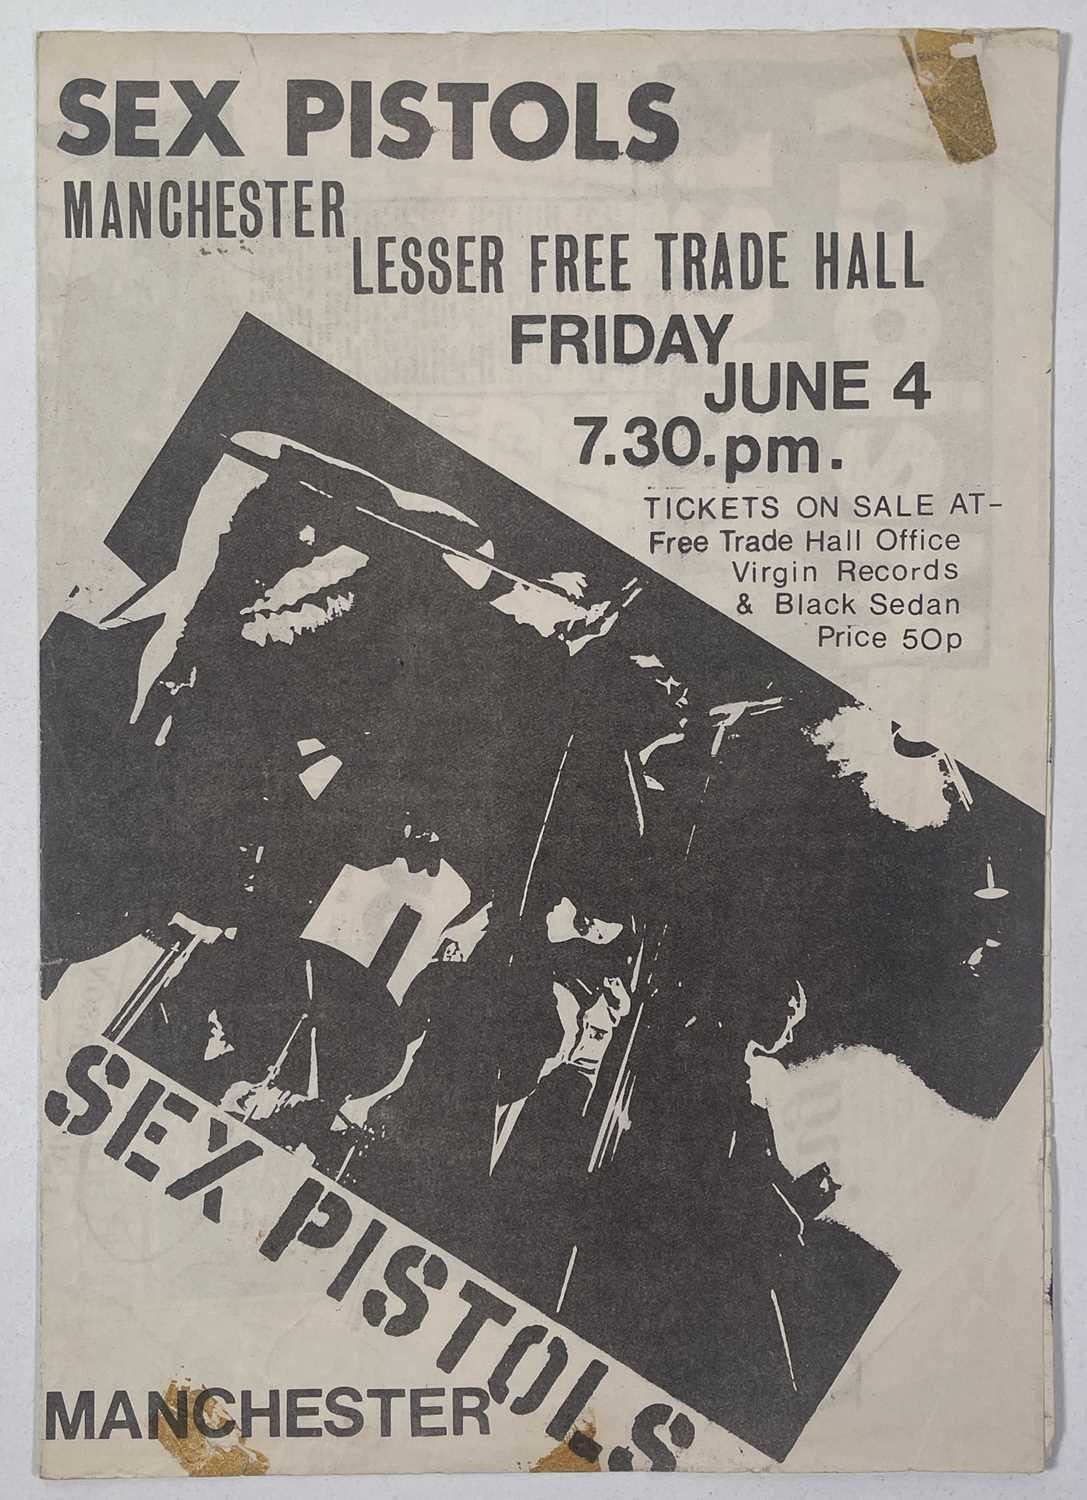 Flyer for Sex Pistol's show at Lesser Free Trade Hall